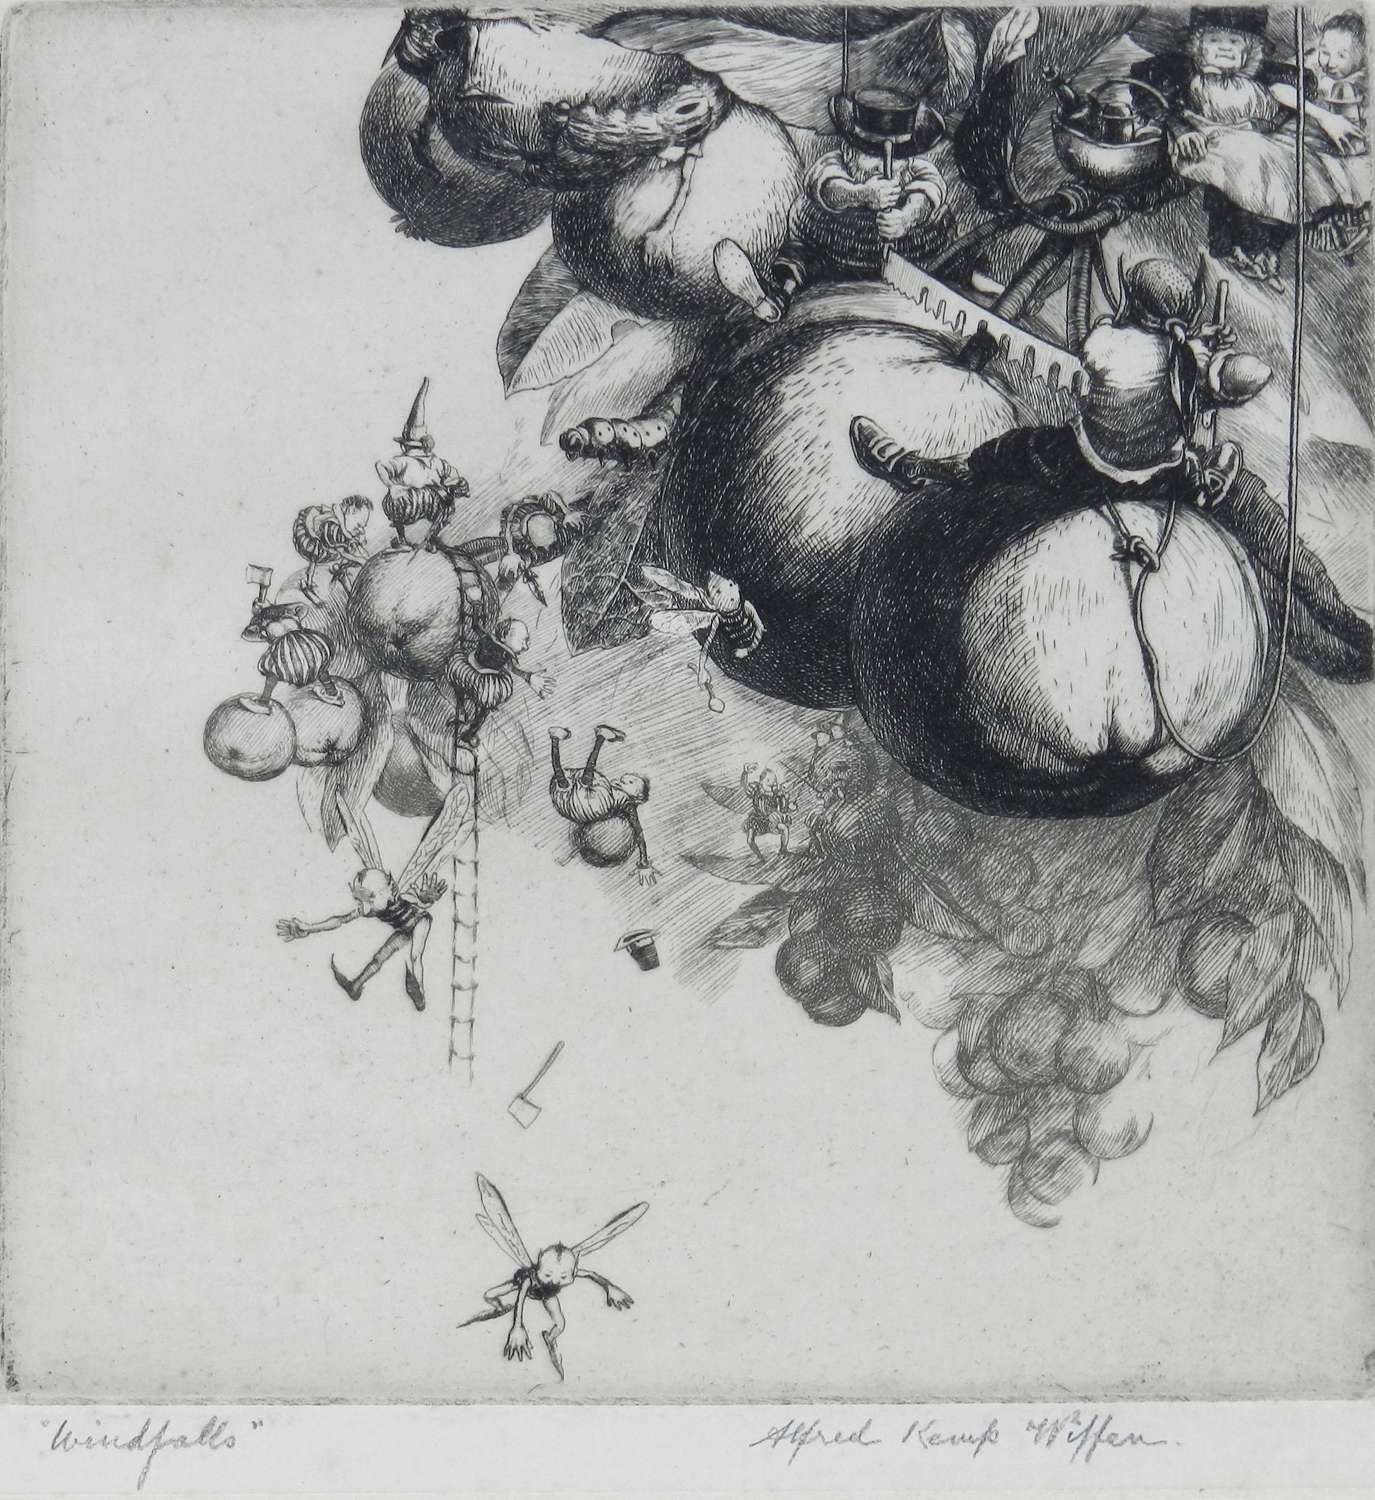 Windfalls Engraving by Alfred Kemp Wiffen c1930